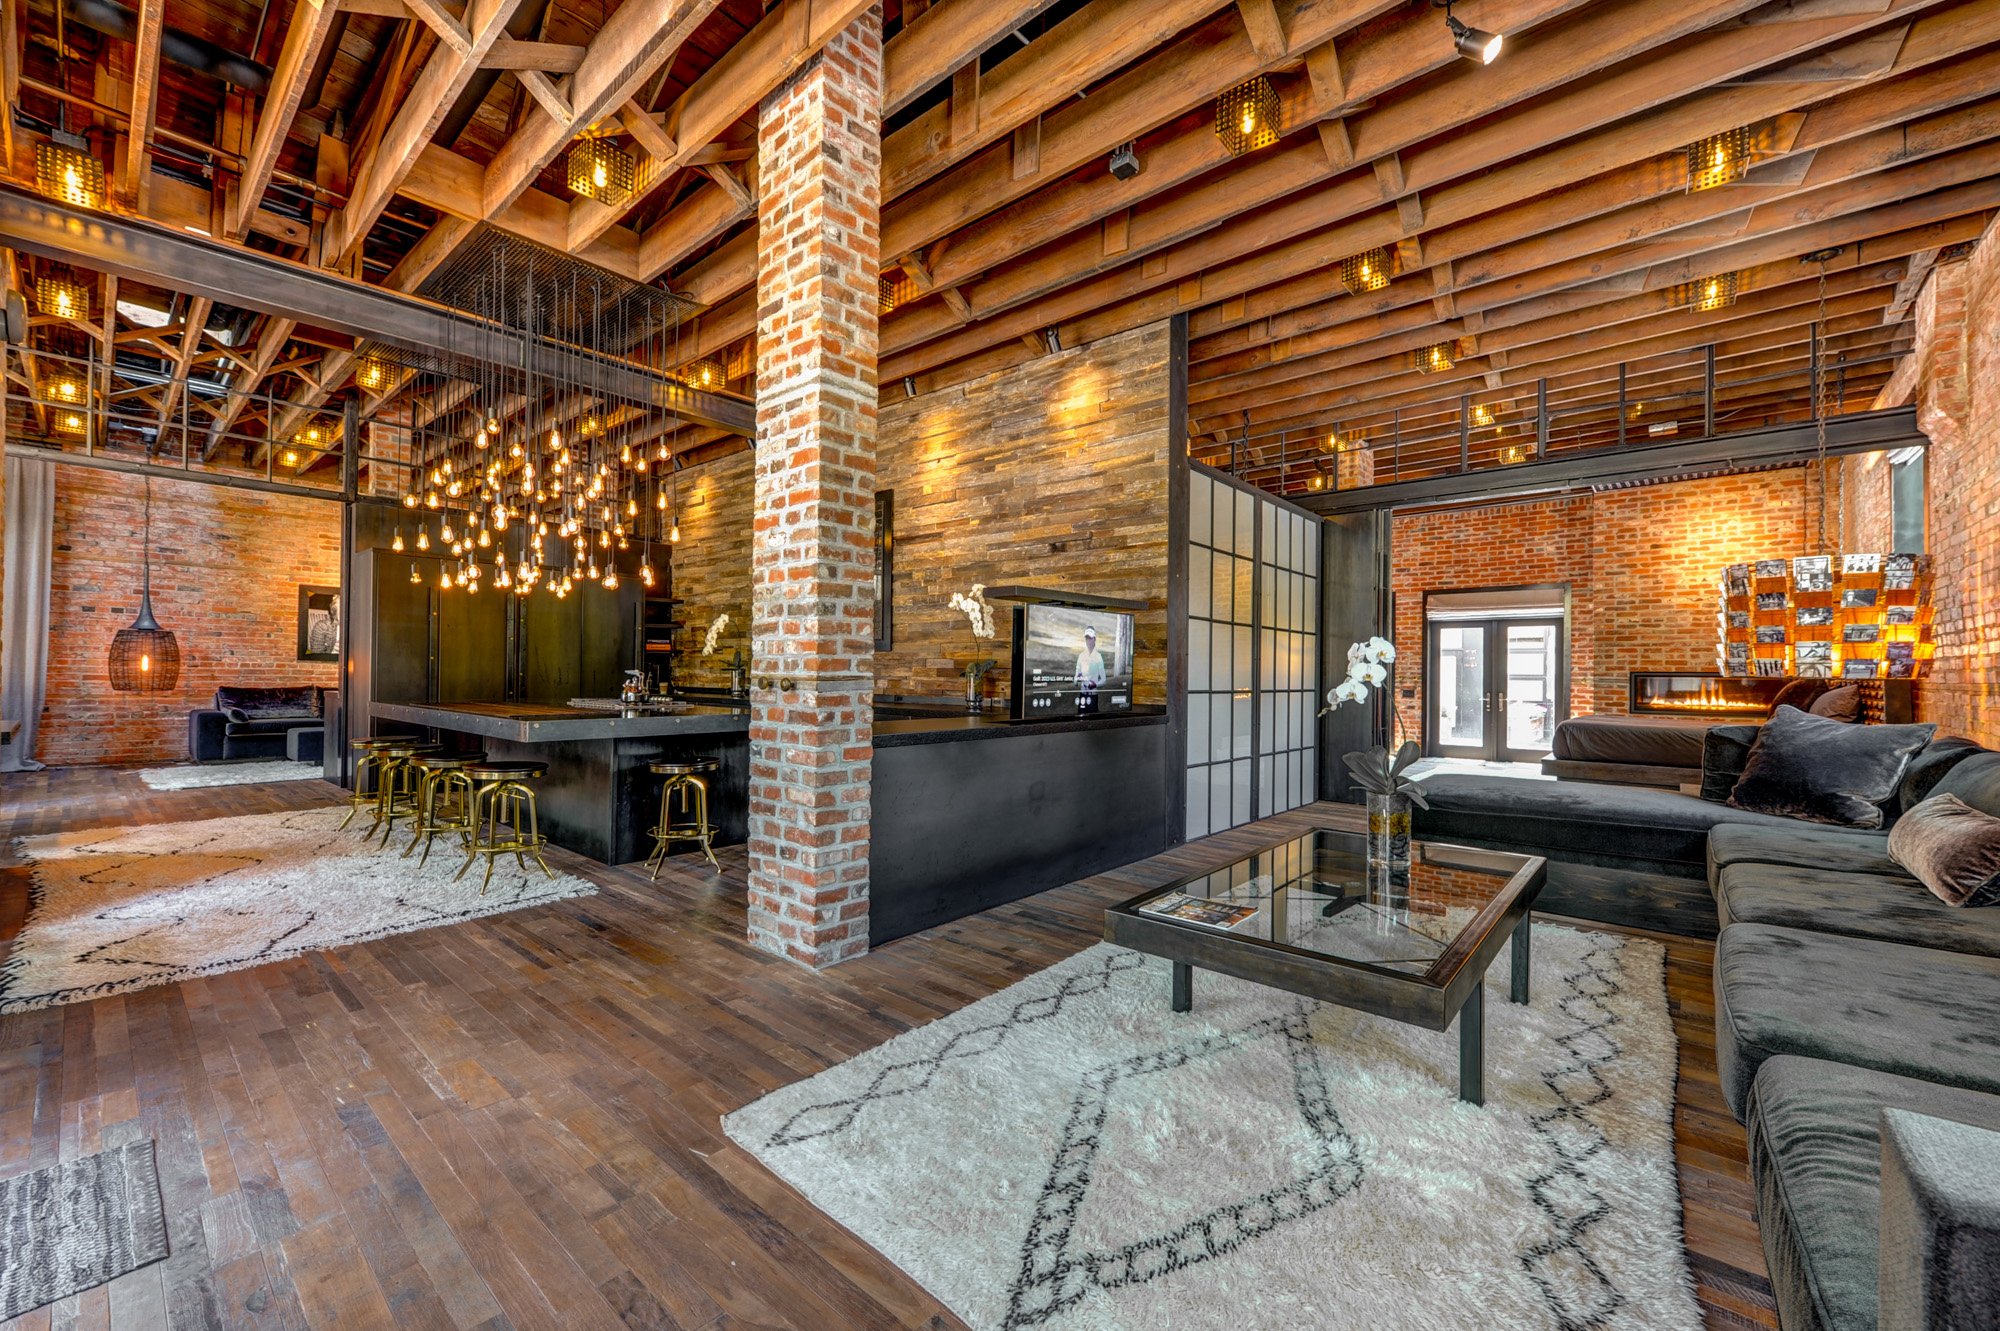 A wide, open, living space with brick pillars and brick walls on all sides.